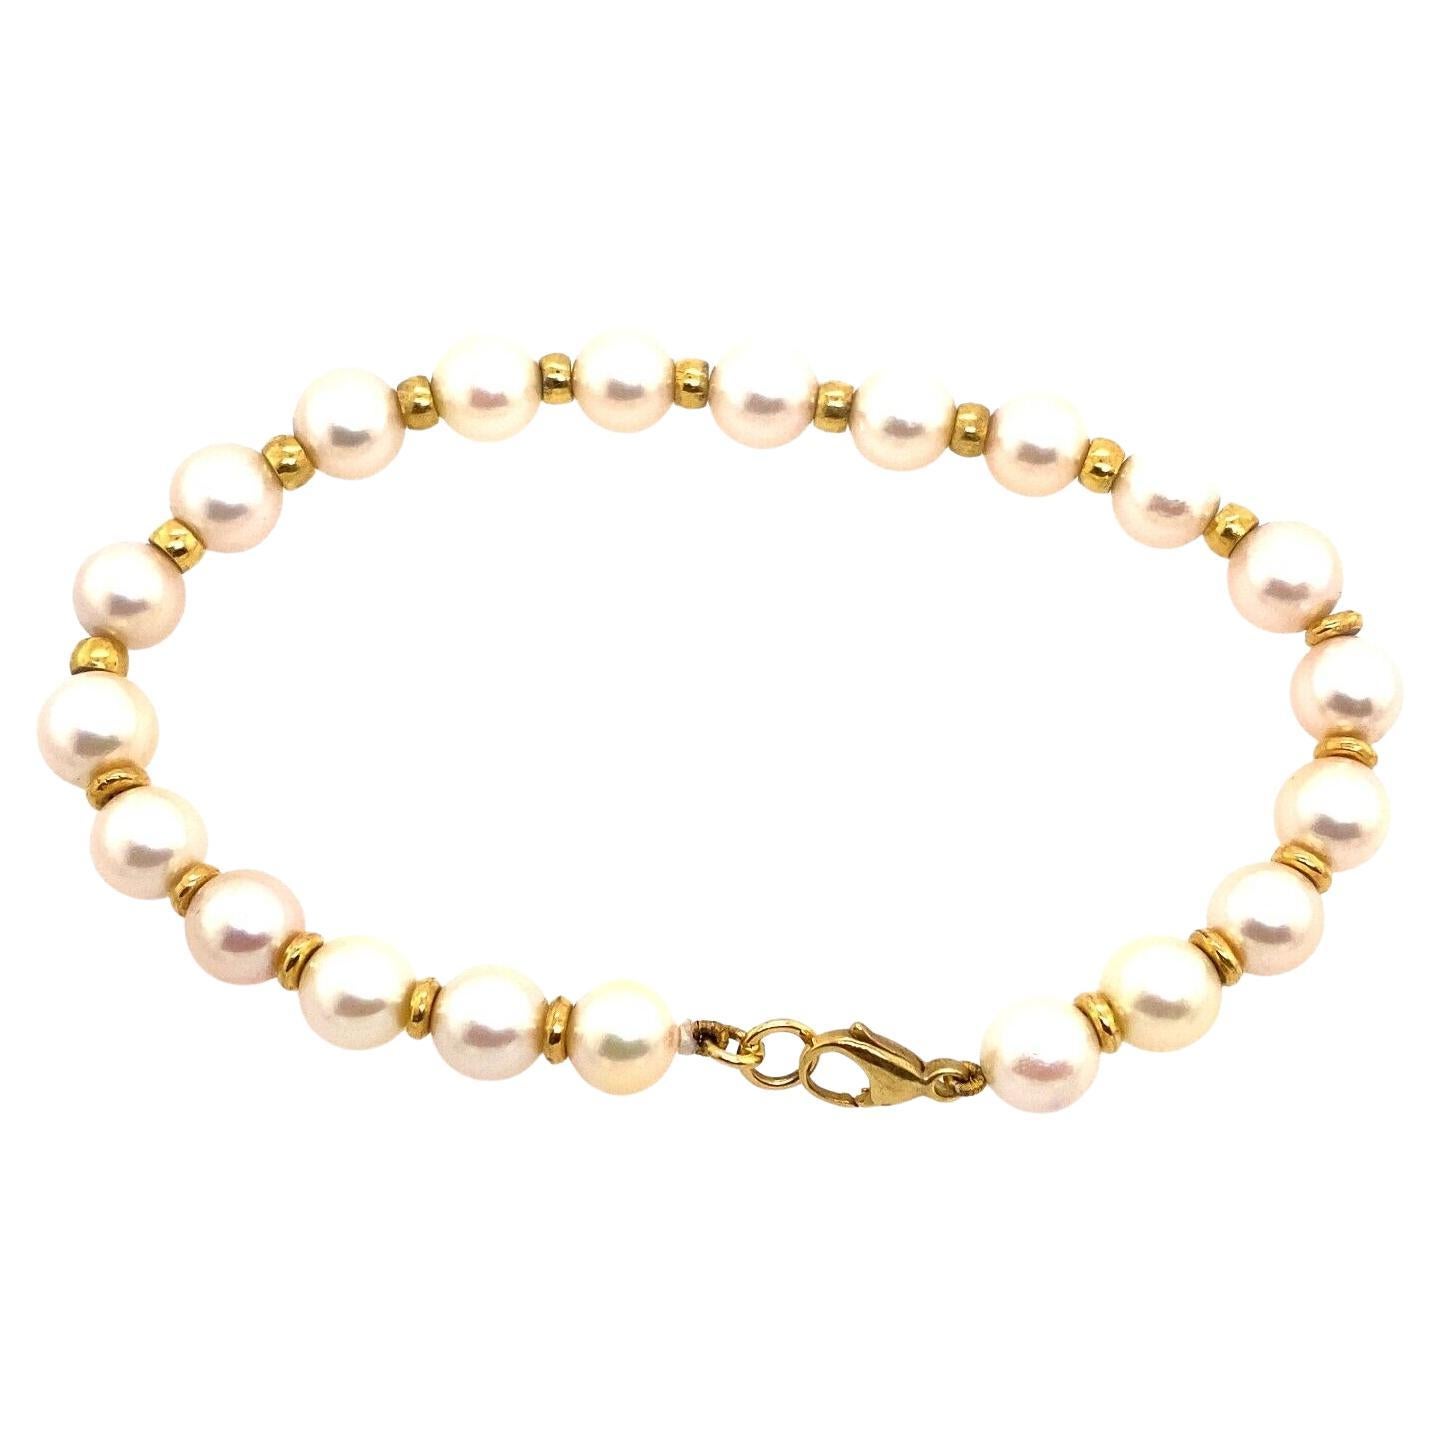 Perfect Matching 7mm Cultured Pearl Bracelet with 9ct Gold Beads in Between For Sale